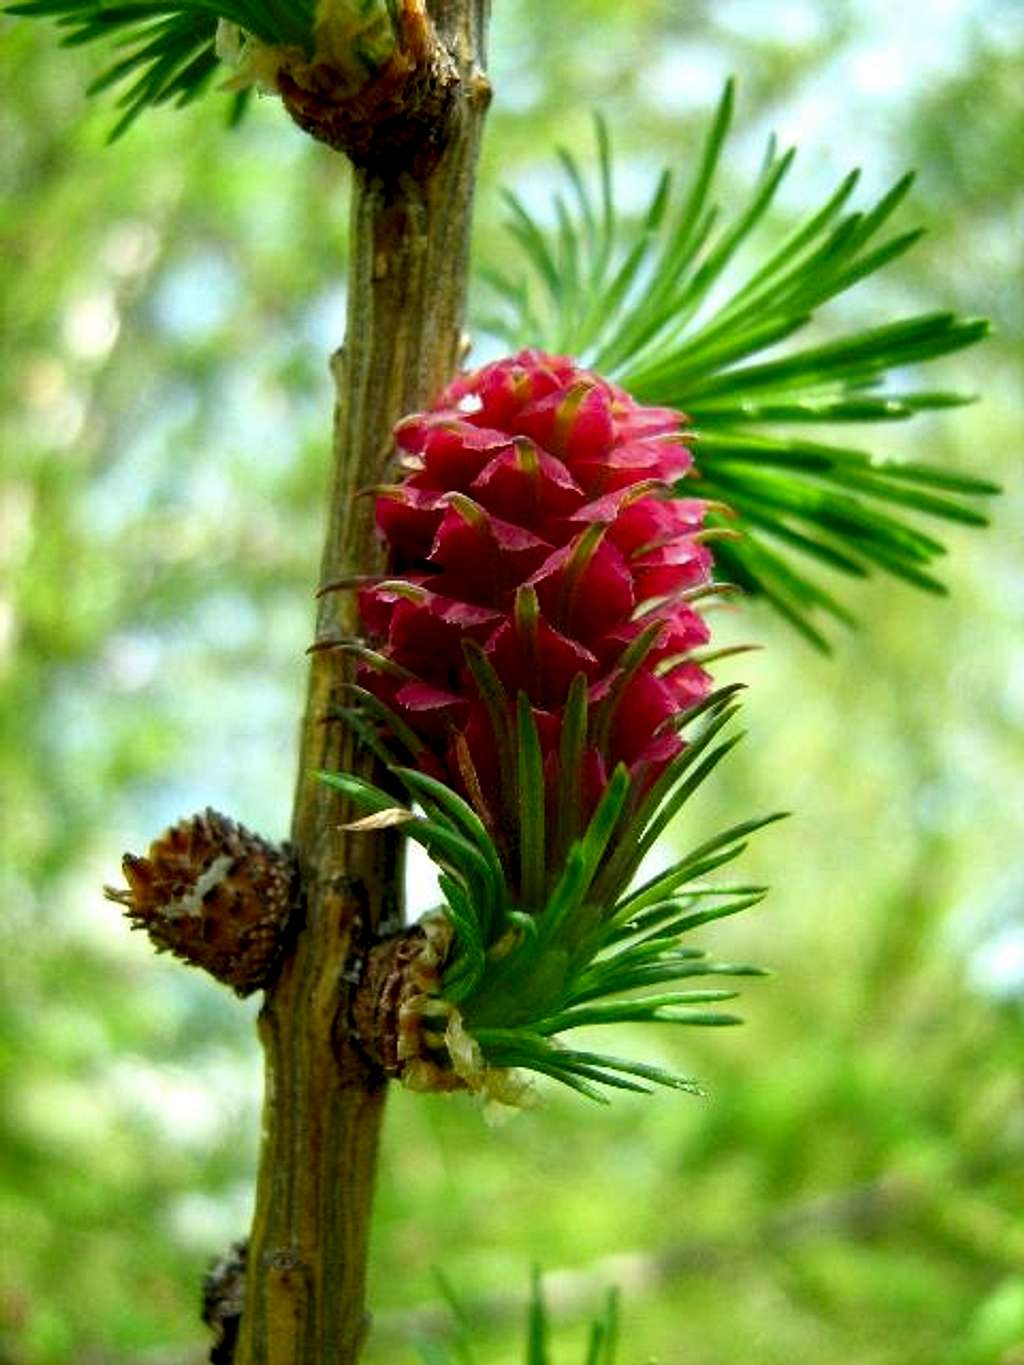 Male Bud and Female Flower of European Larch